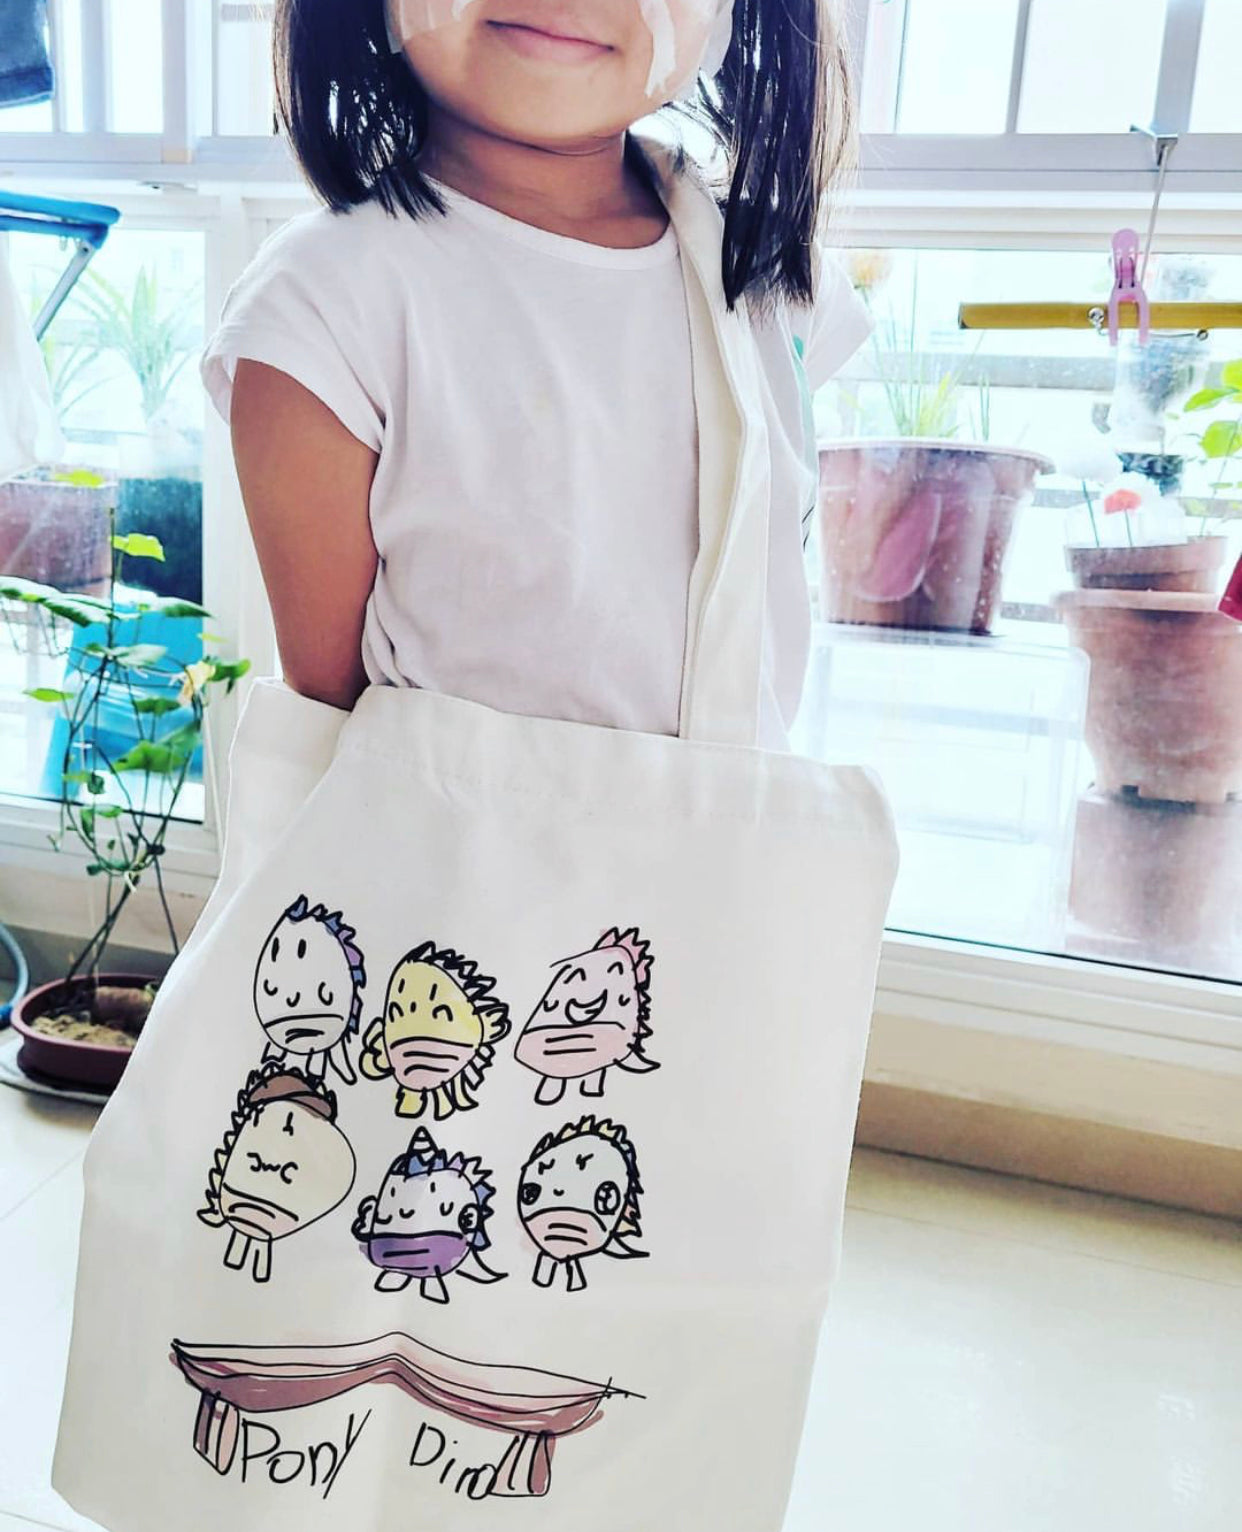 Turn Your Kid's Drawing Into Gifts (Keychain, Magnet, Pillow)